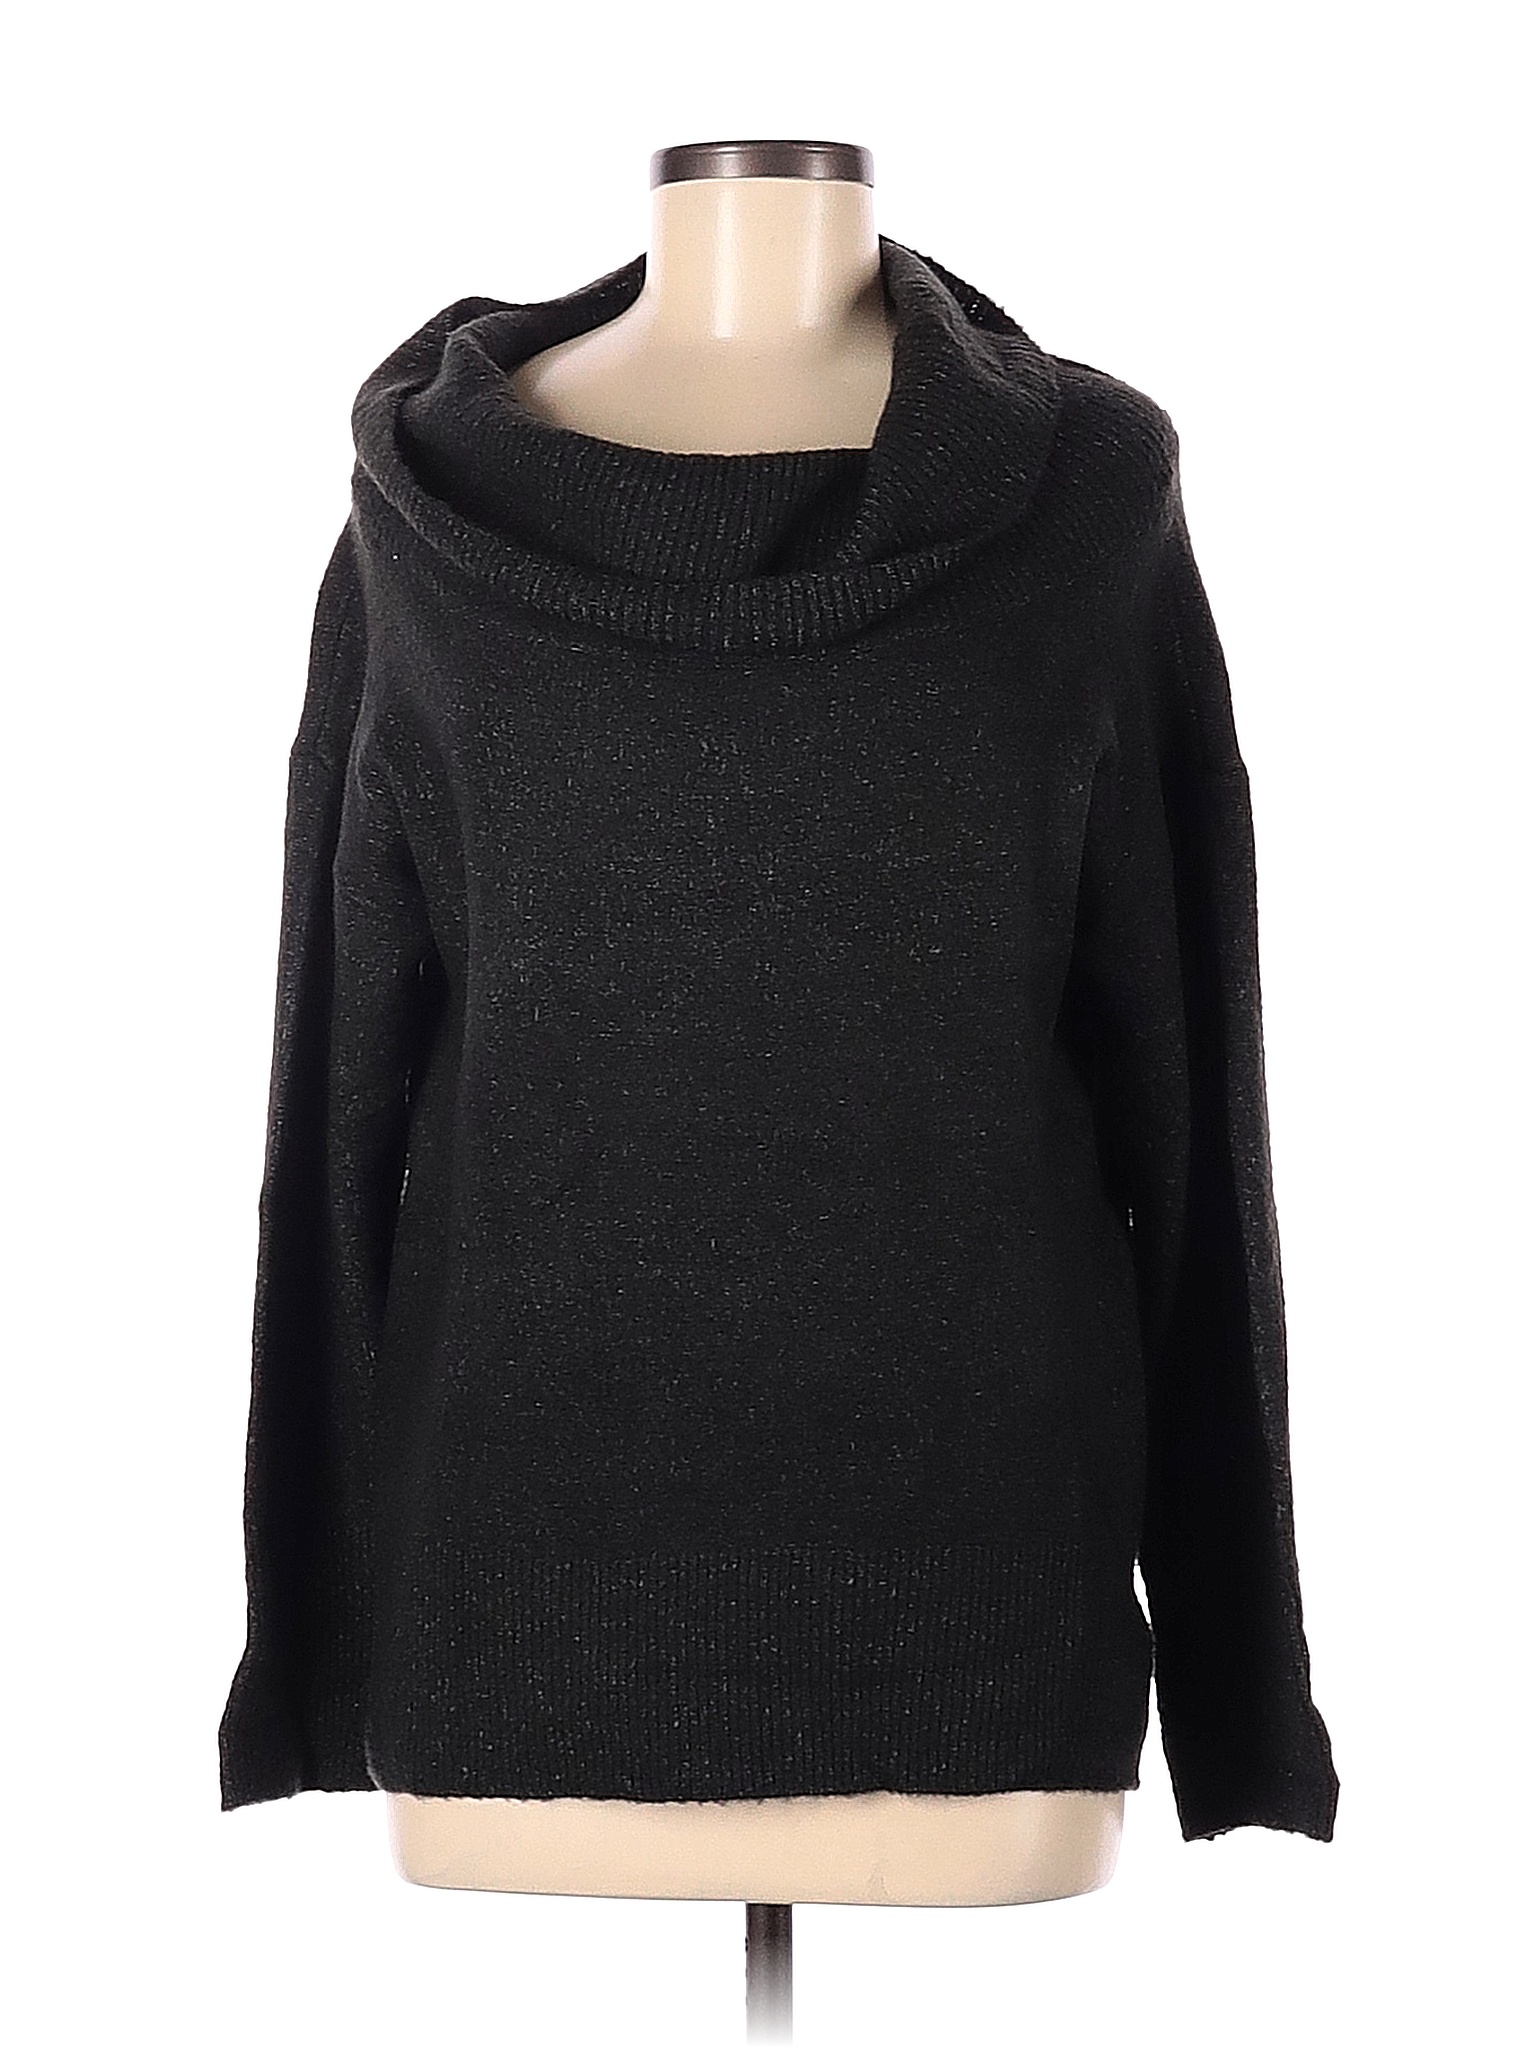 Cable & Gauge Color Block Solid Black Pullover Sweater Size M - 65% off ...